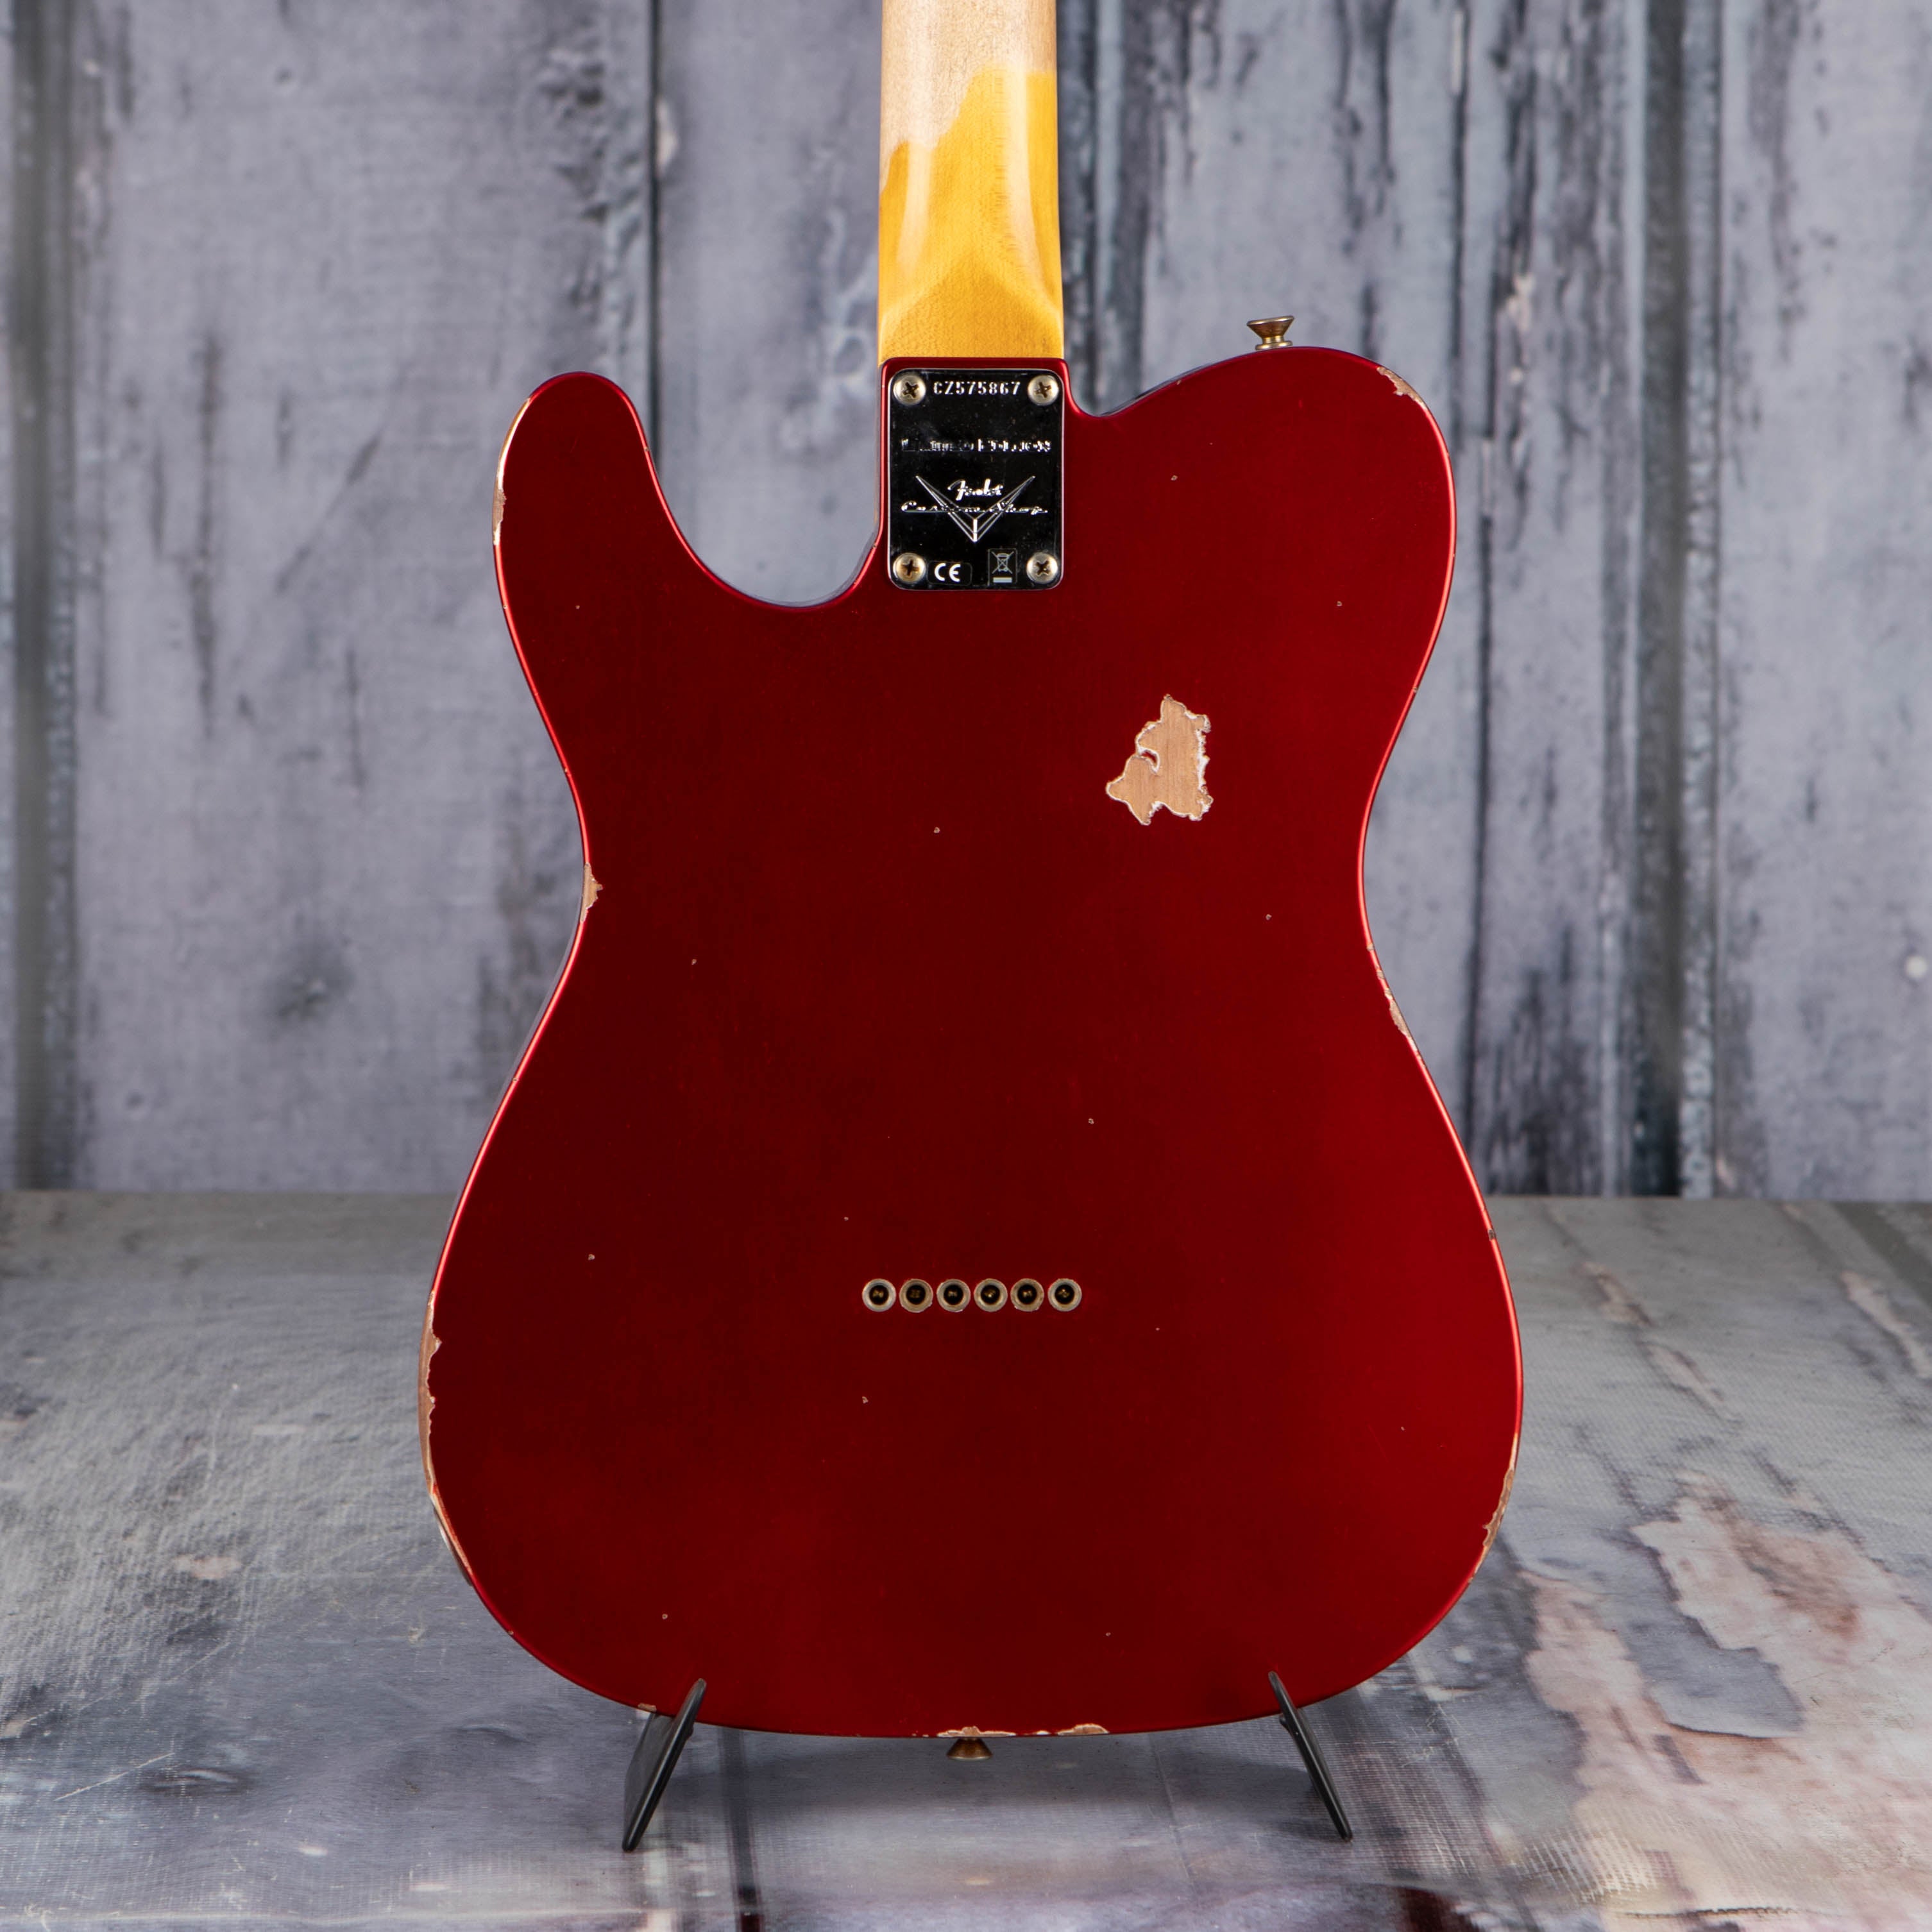 Fender Custom Shop Limited 1961 Telecaster Relic Electric Guitar, Aged Candy Apple Red, back closeup